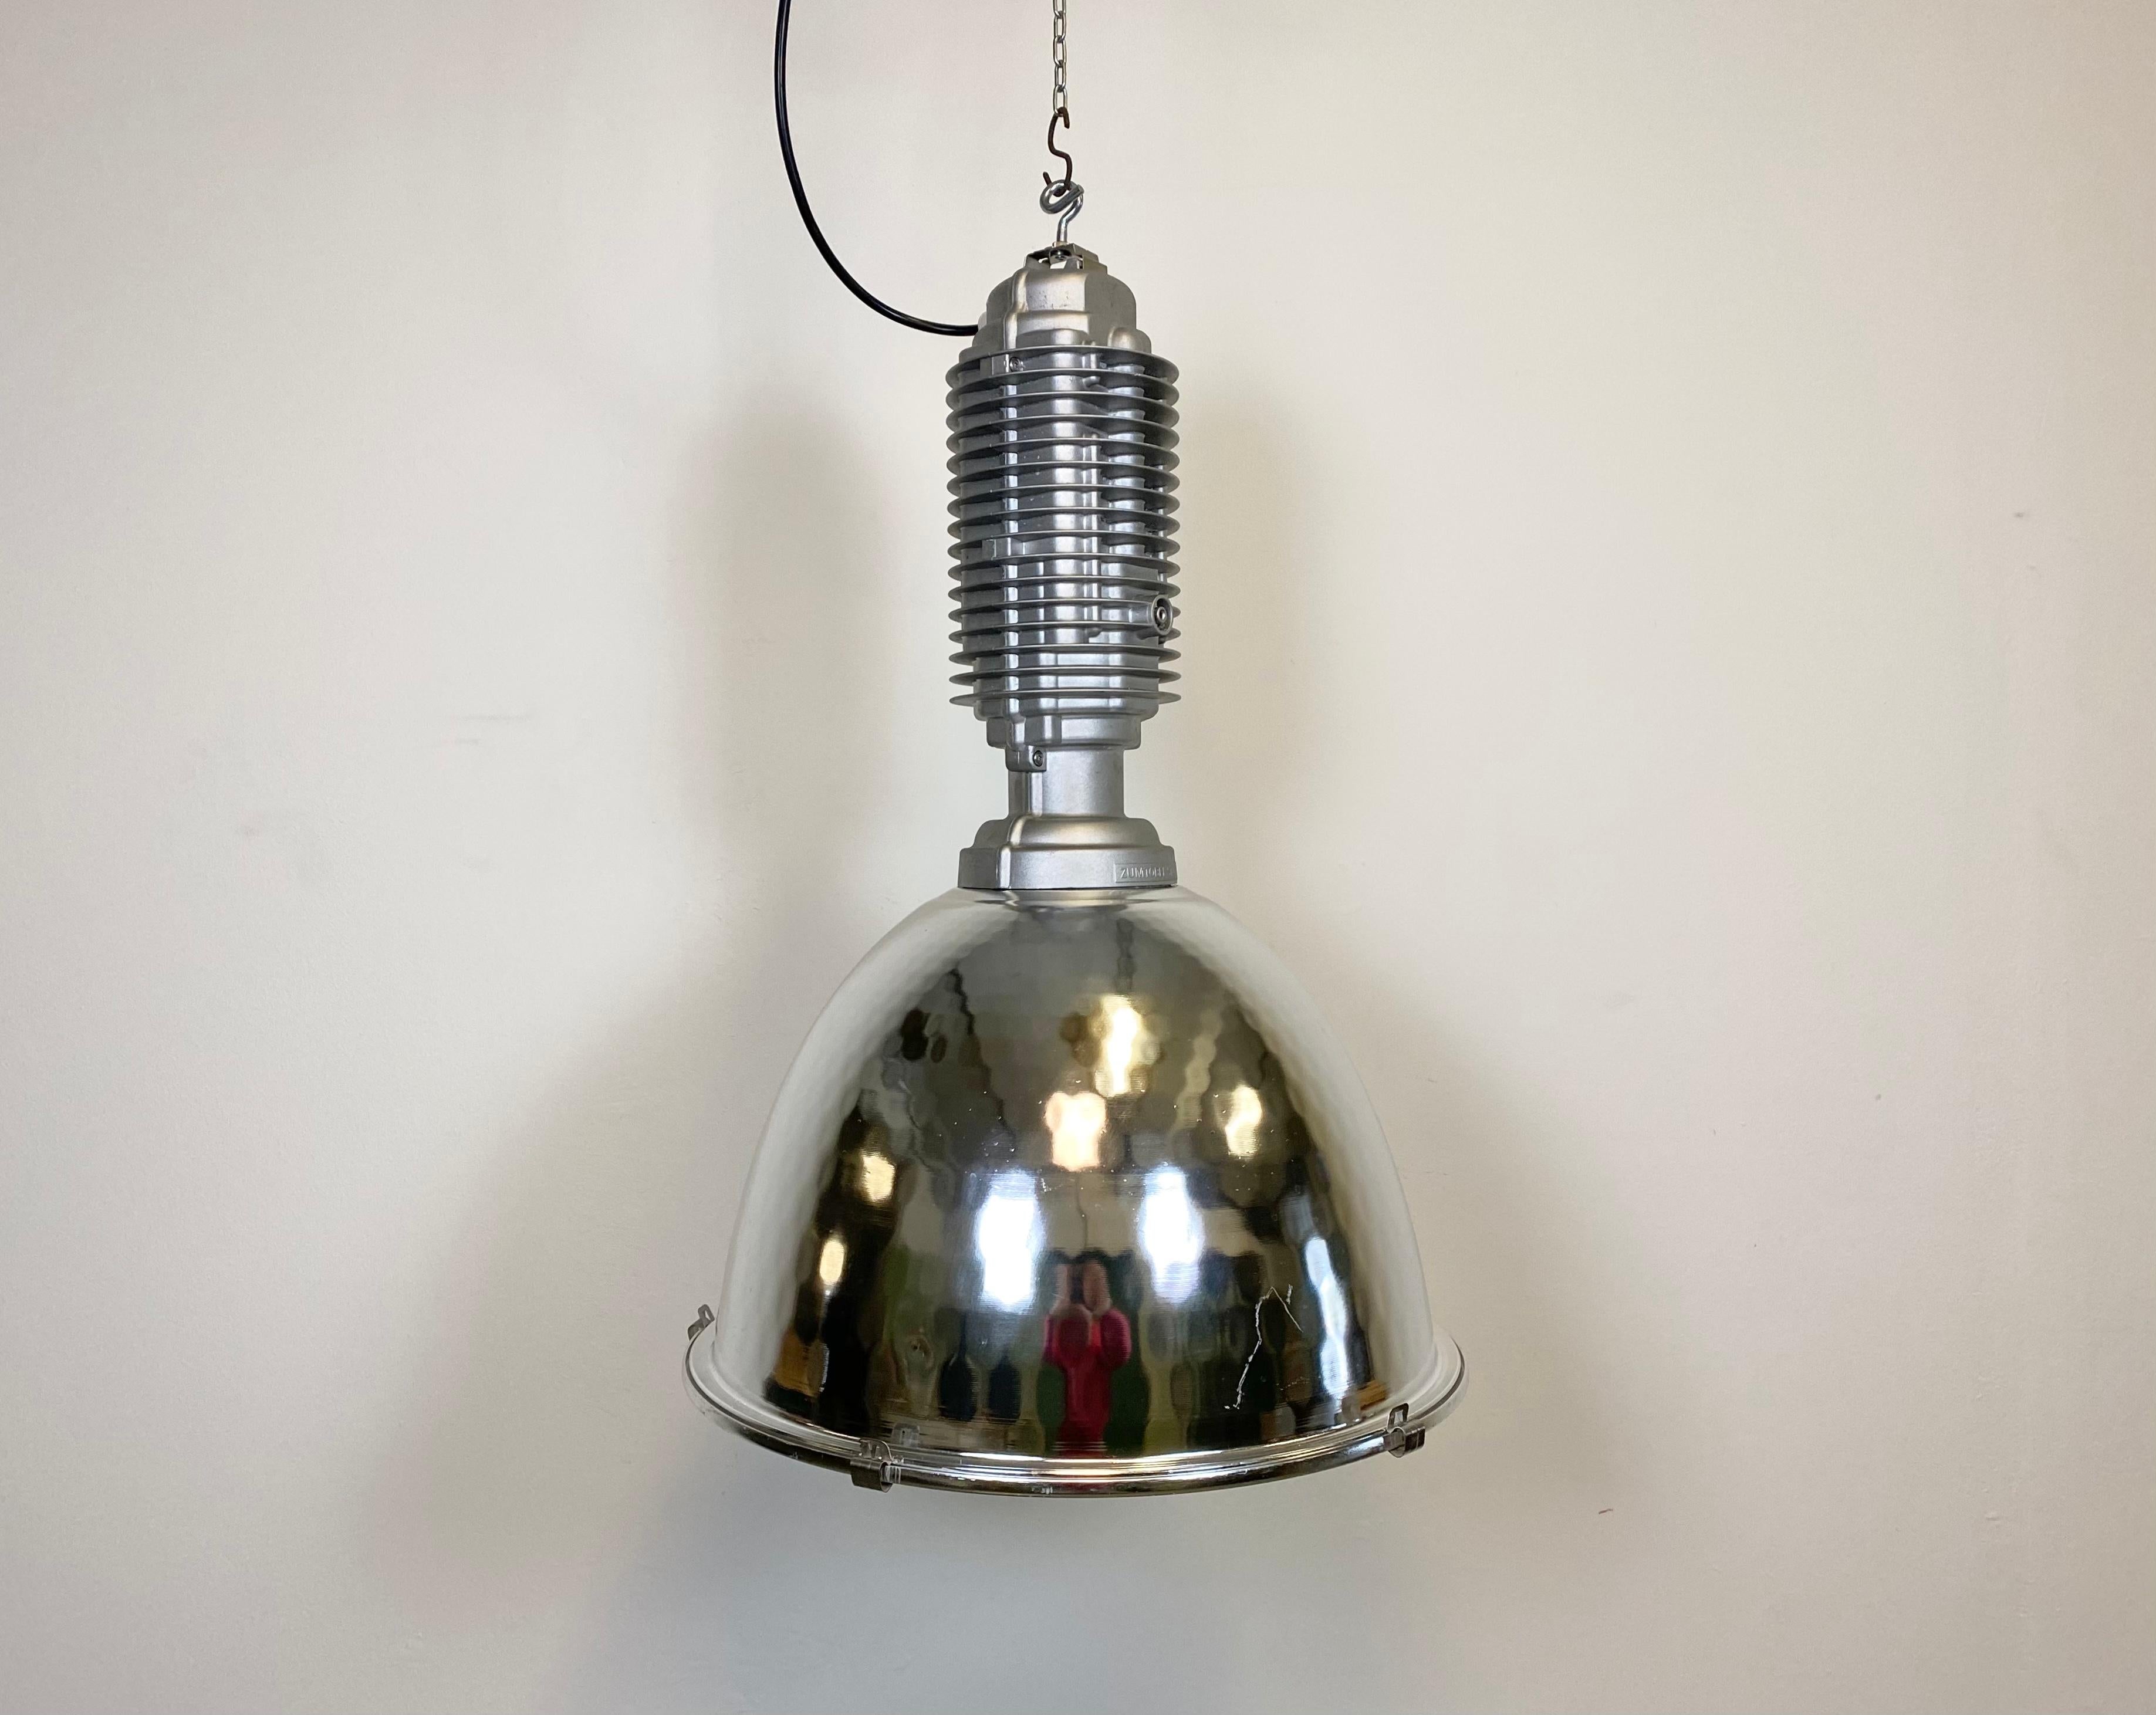 This industrial pendant light was designed by Charles Keller for Zumtobel Staff and was used in factories. It features a cast aluminum top,an aluminium shade with clear glass cover, a socket for E27 light bulbs and new wire. It weights 7,5 kg. The